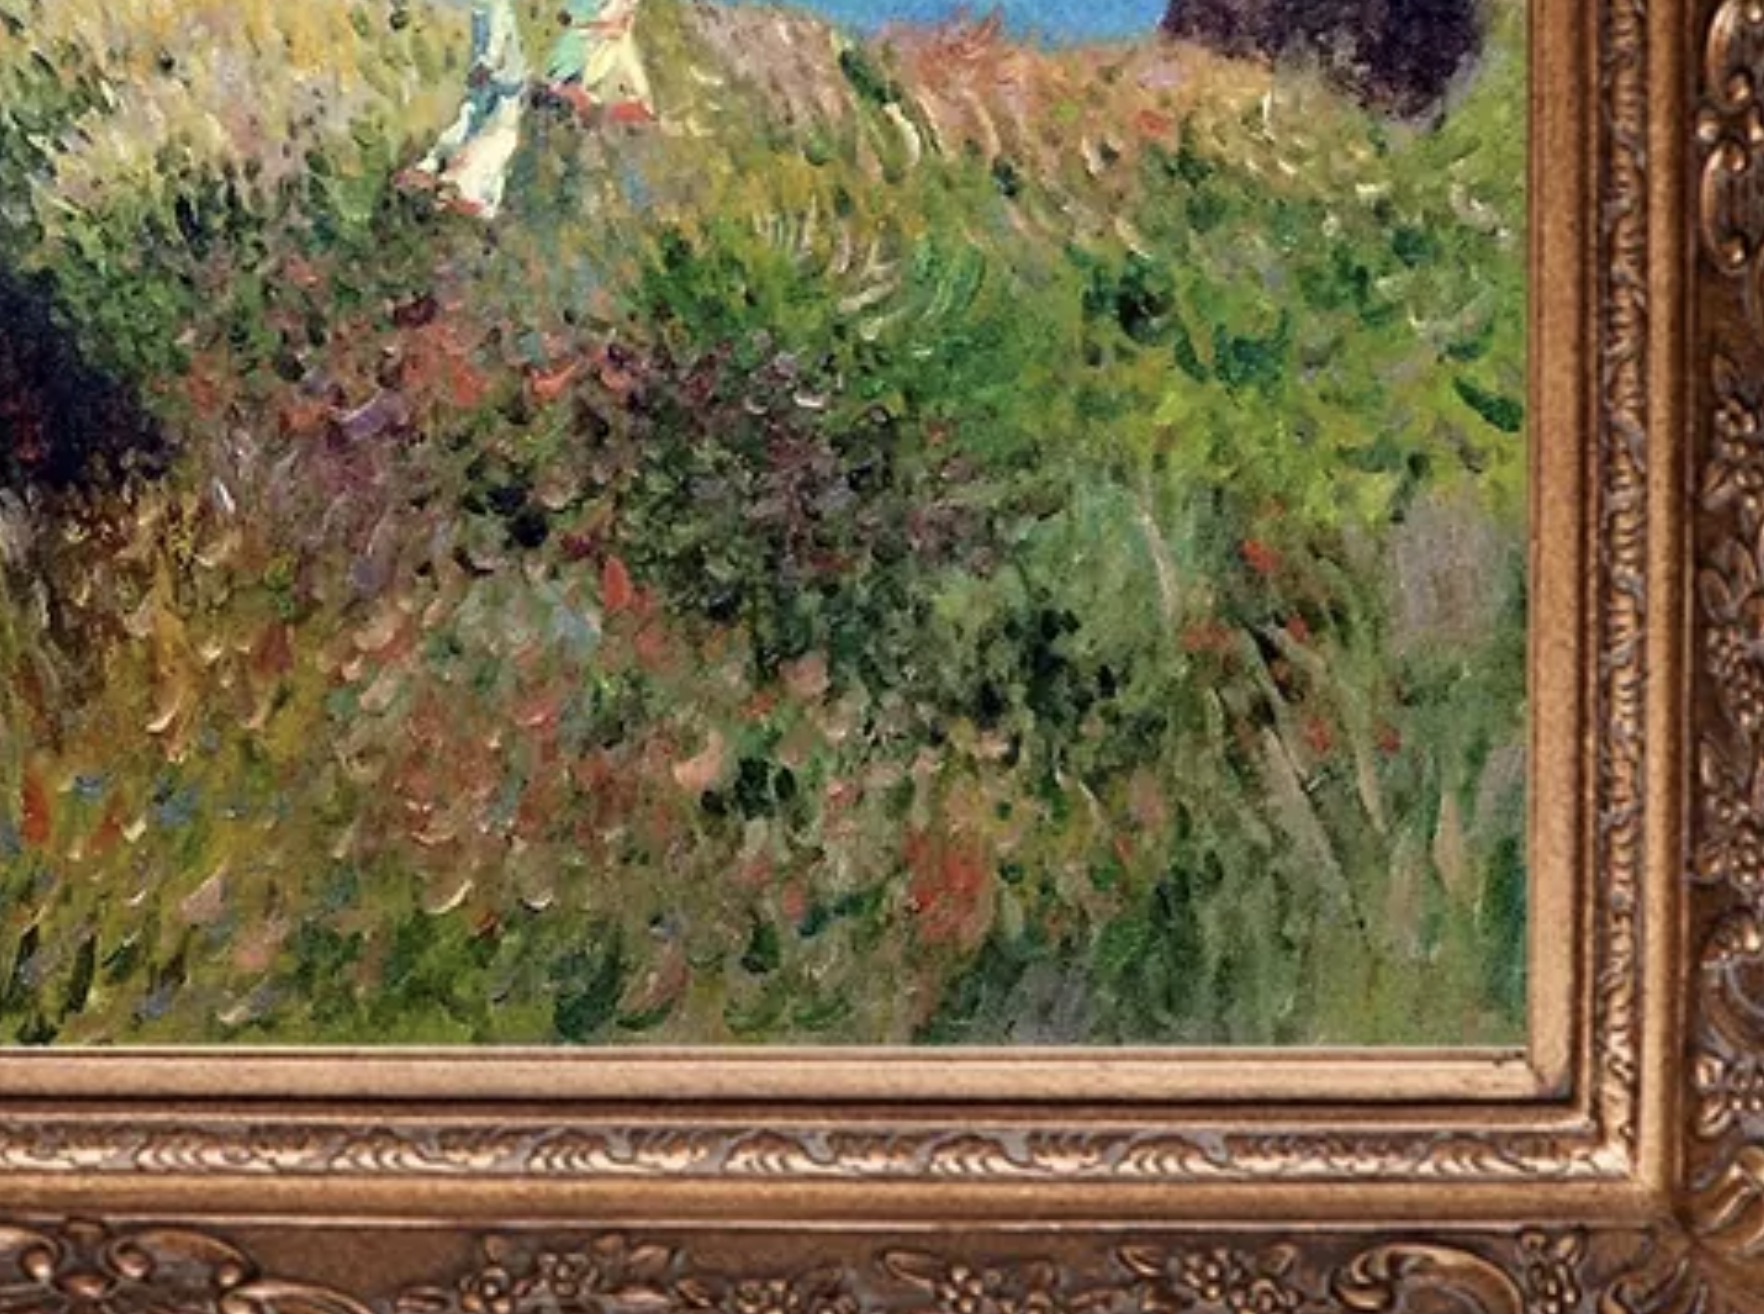 Claude Monet "Cliff Walk at Porville, 1882" Oil Painting, After - Image 6 of 6